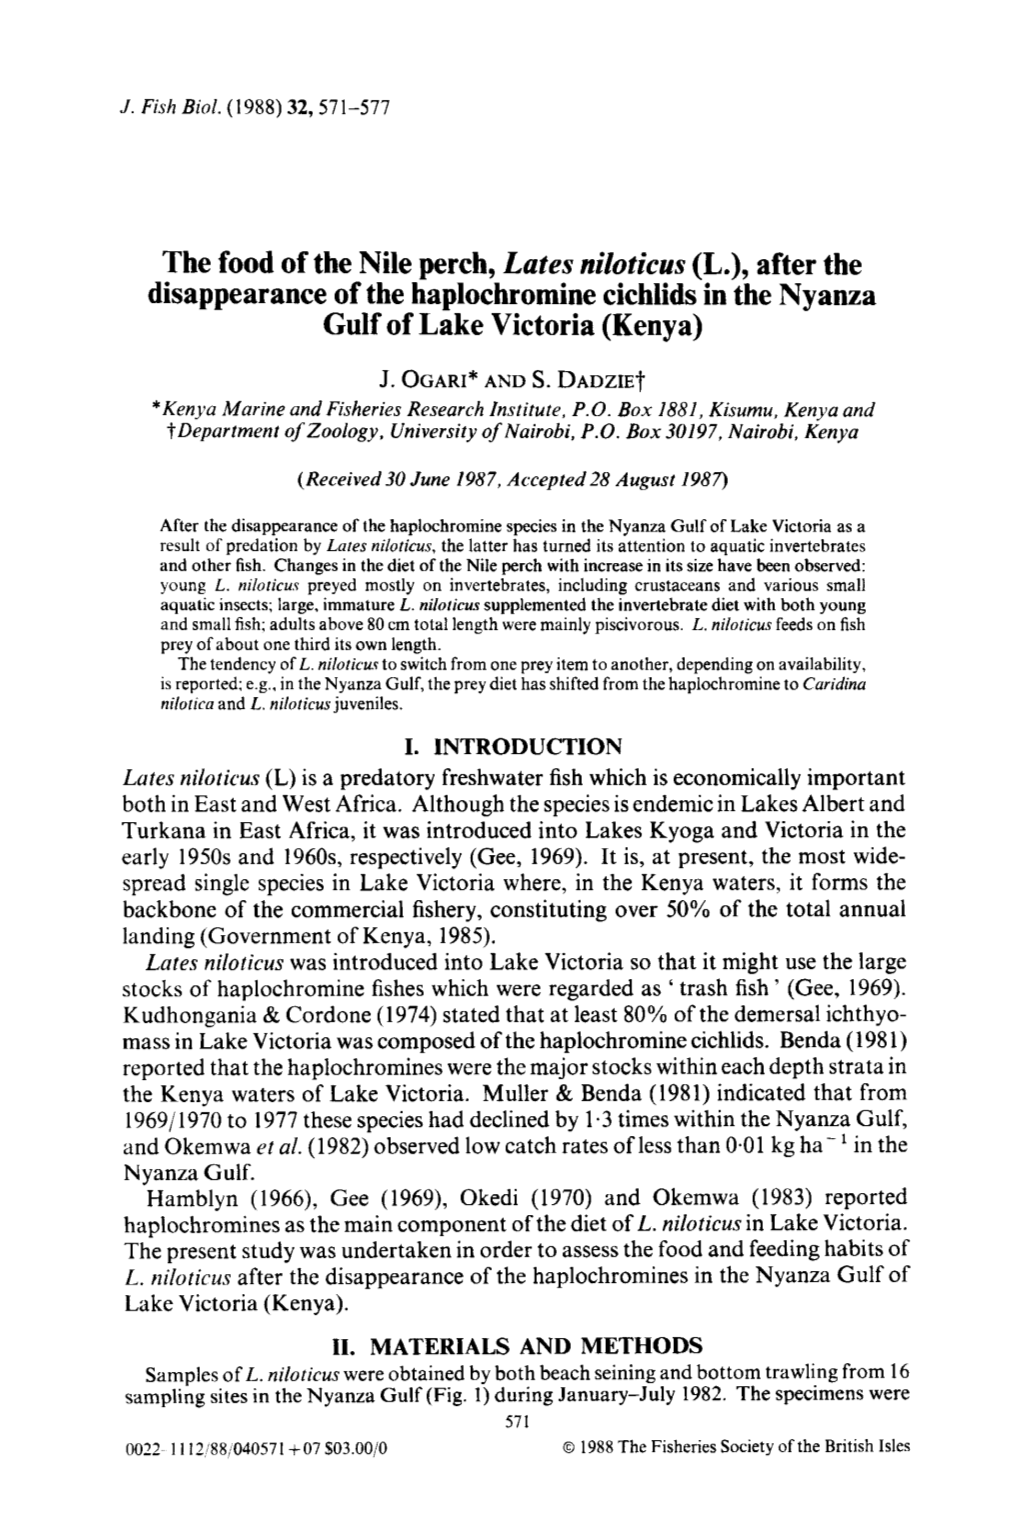 The Food of the Nile Perch, Lates Niloticus (L.), After the Disappearance of the Haplochromine Cichlids in the Nyanza Gulf of Lake Victoria (Kenya)